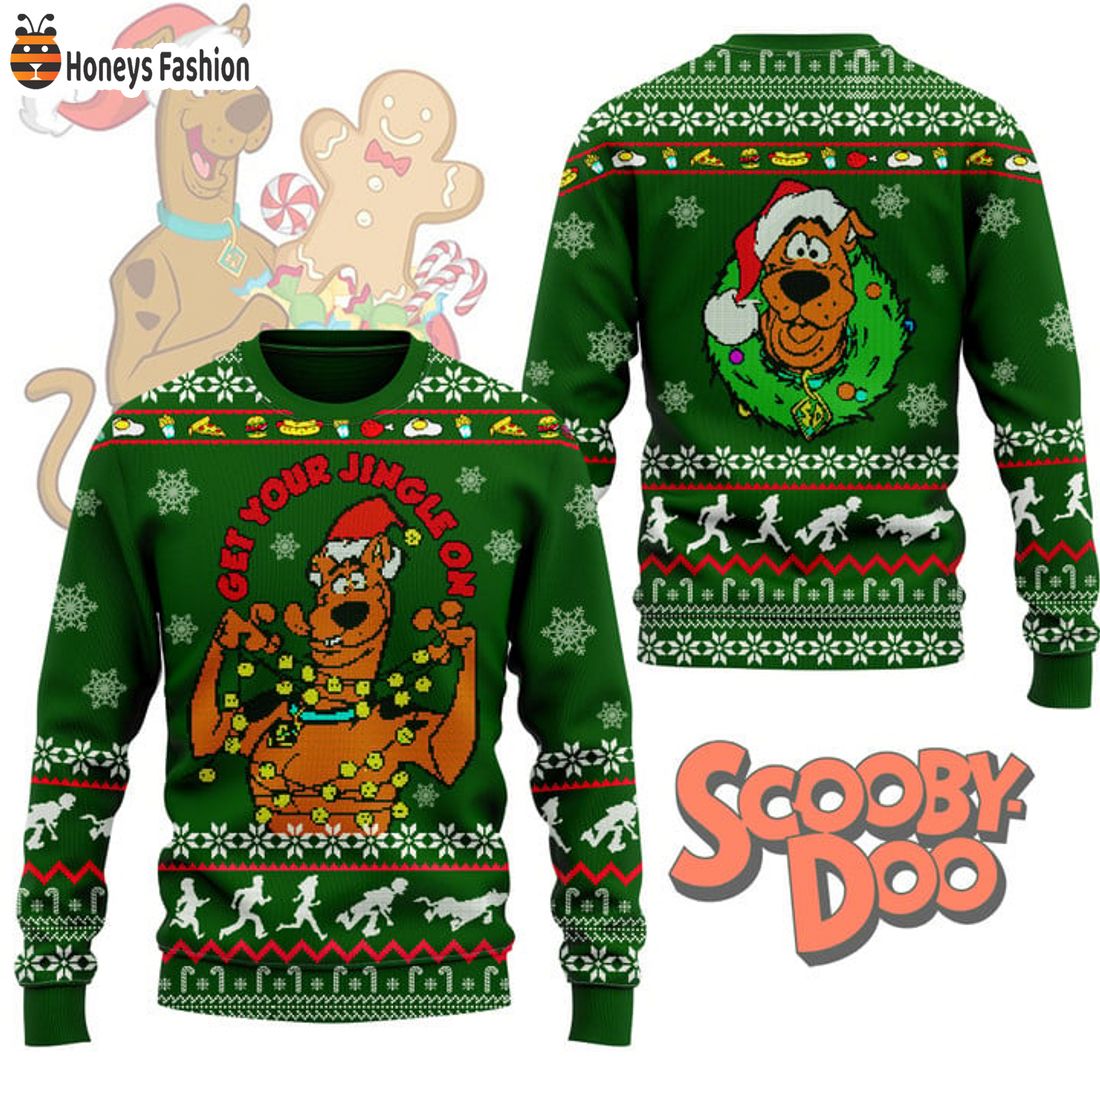 HOT Scooby Doo Get Your Jingle On Ugly Christmas Sweater